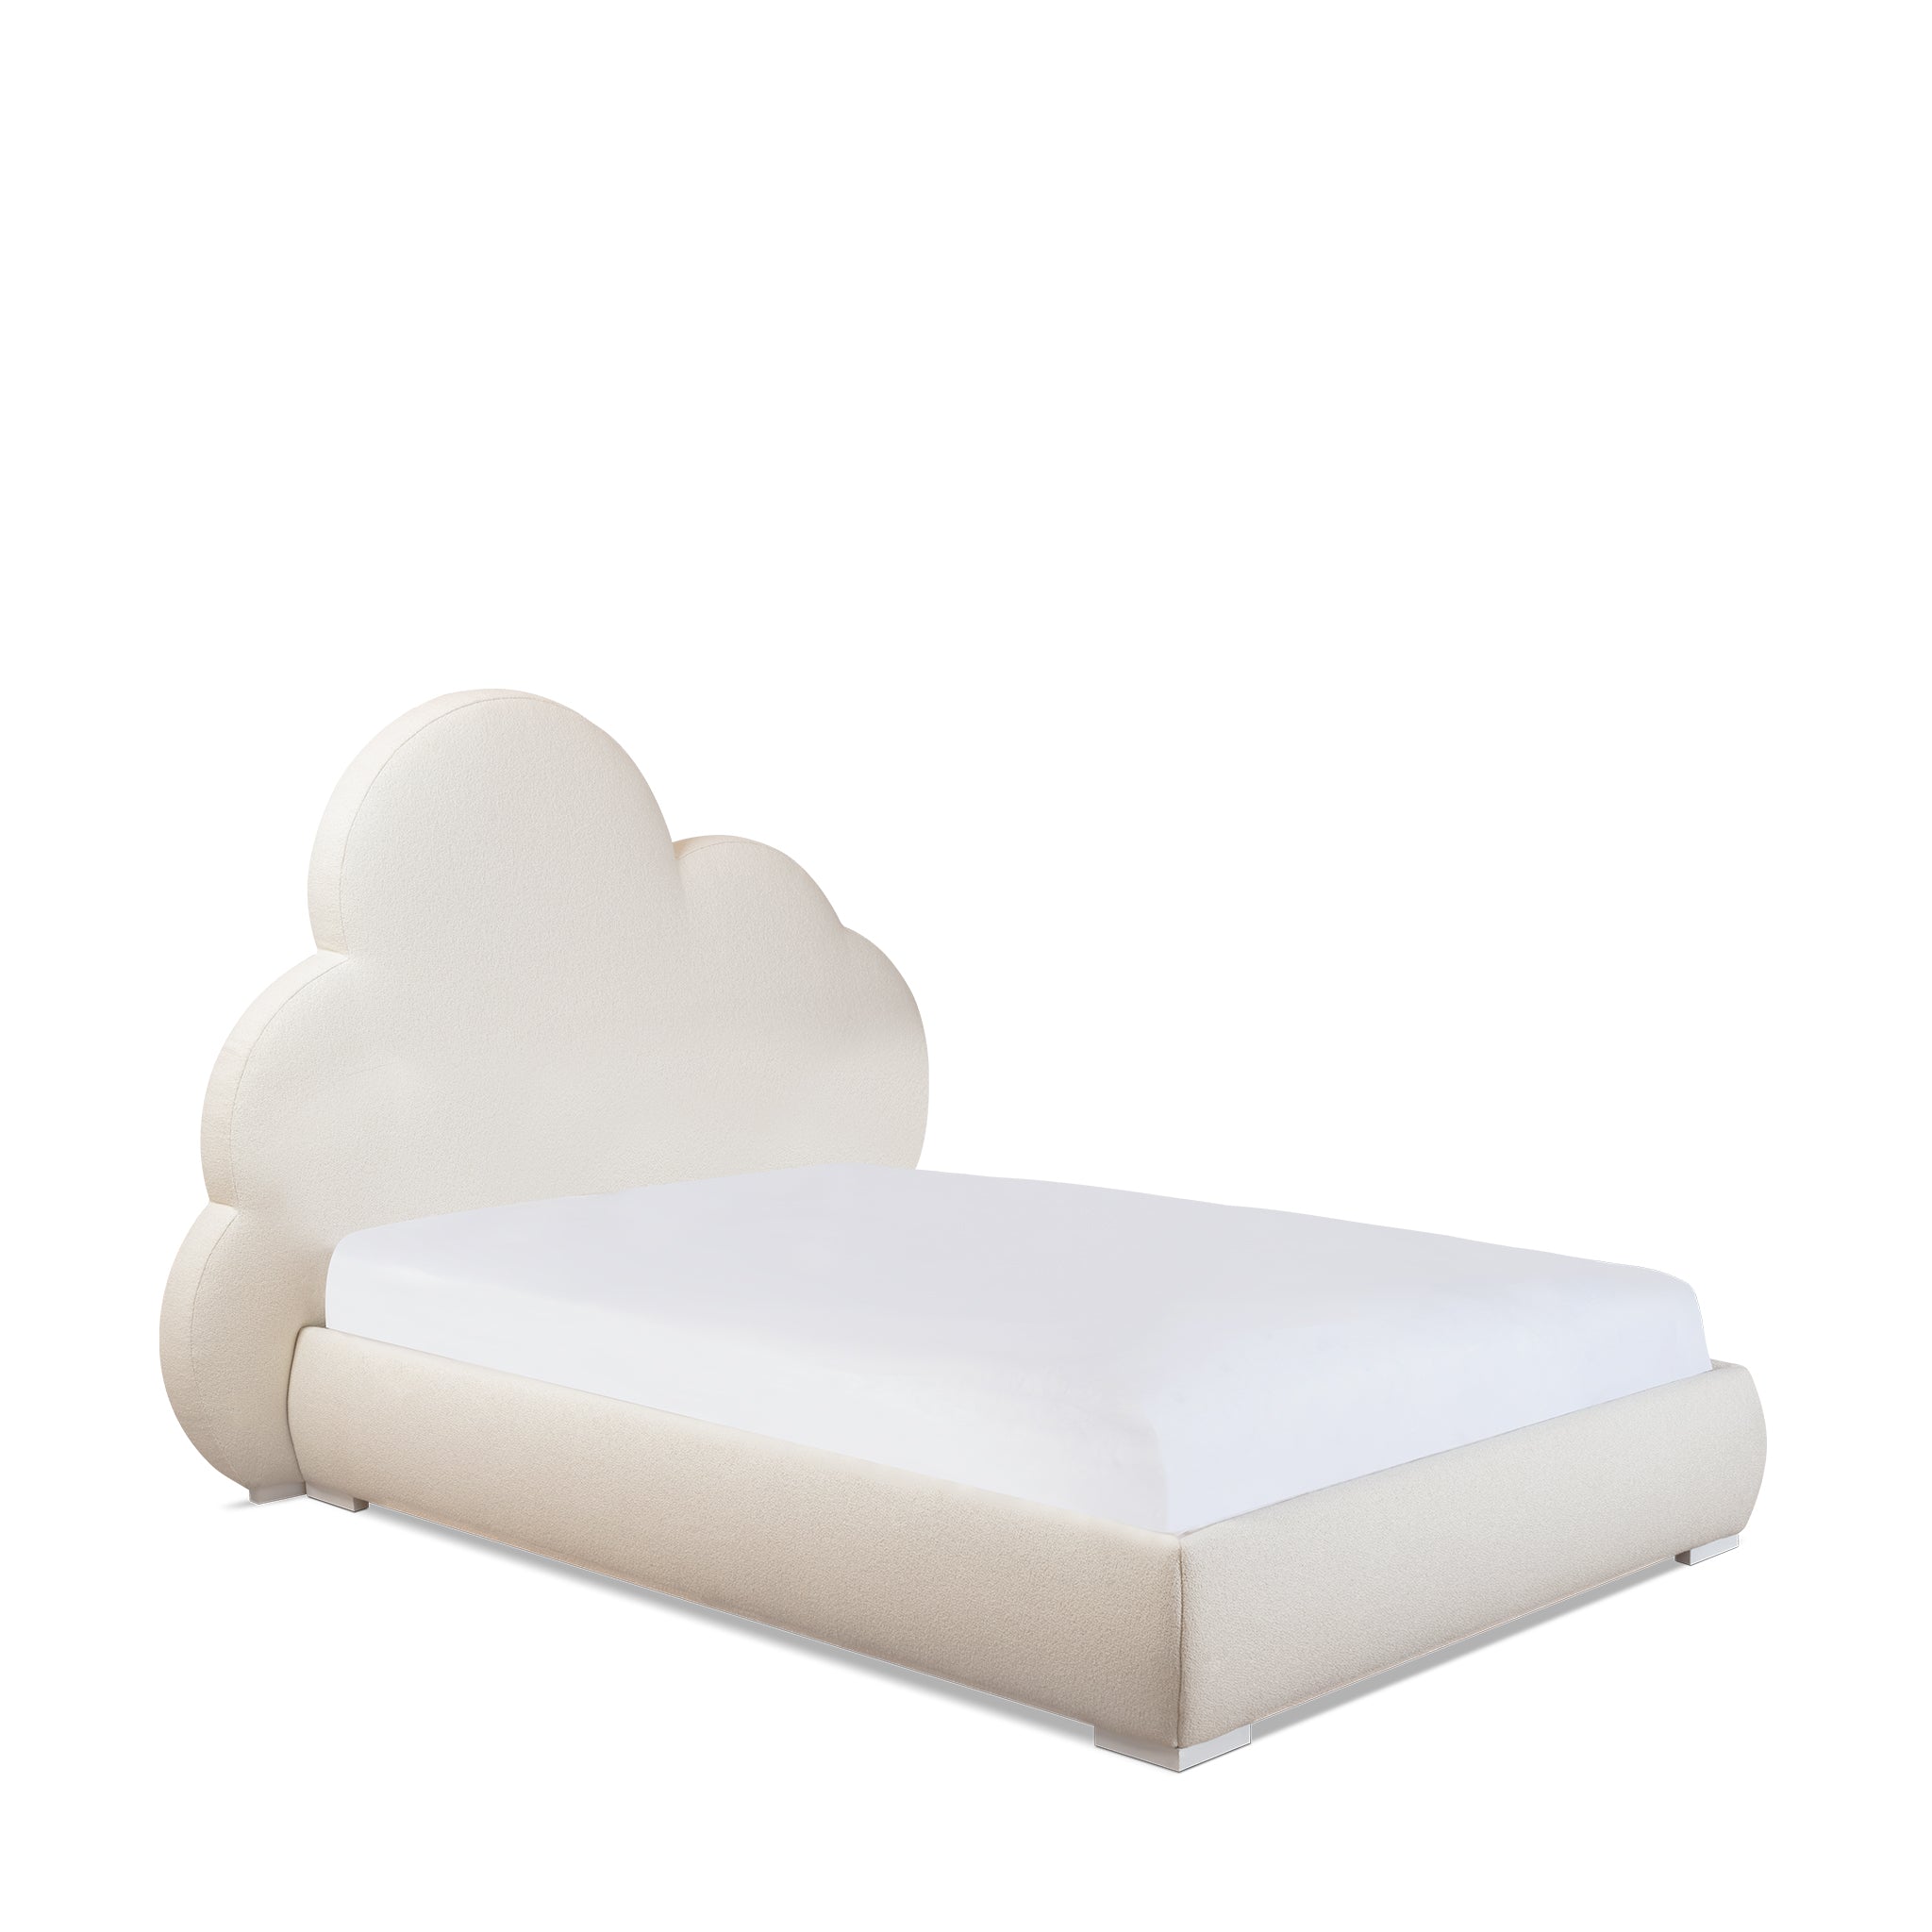 CLOUD BED A LEFT ANGLED US QUEEN SIZE